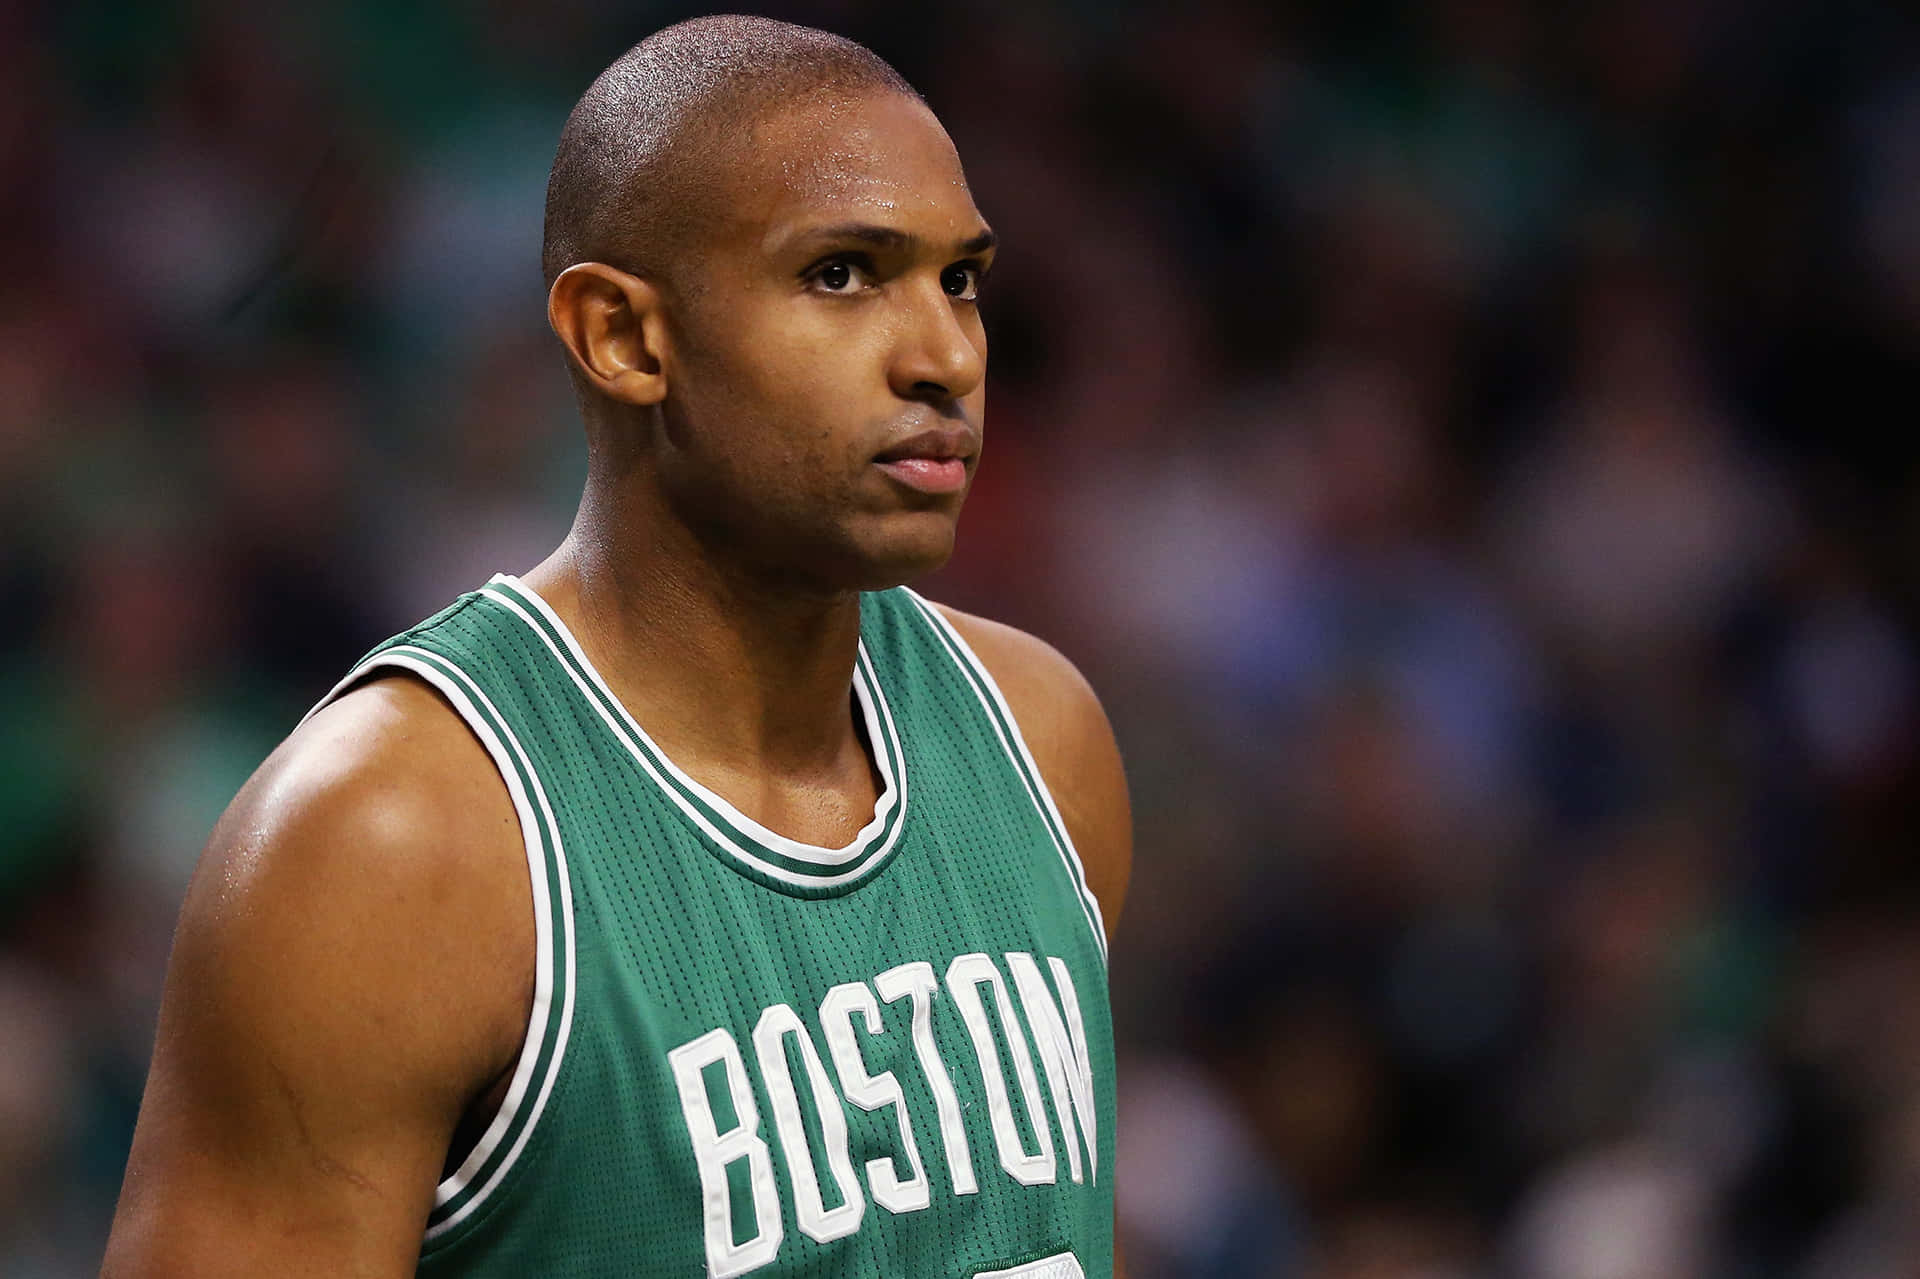 Al Horford poised to dominate on the court.